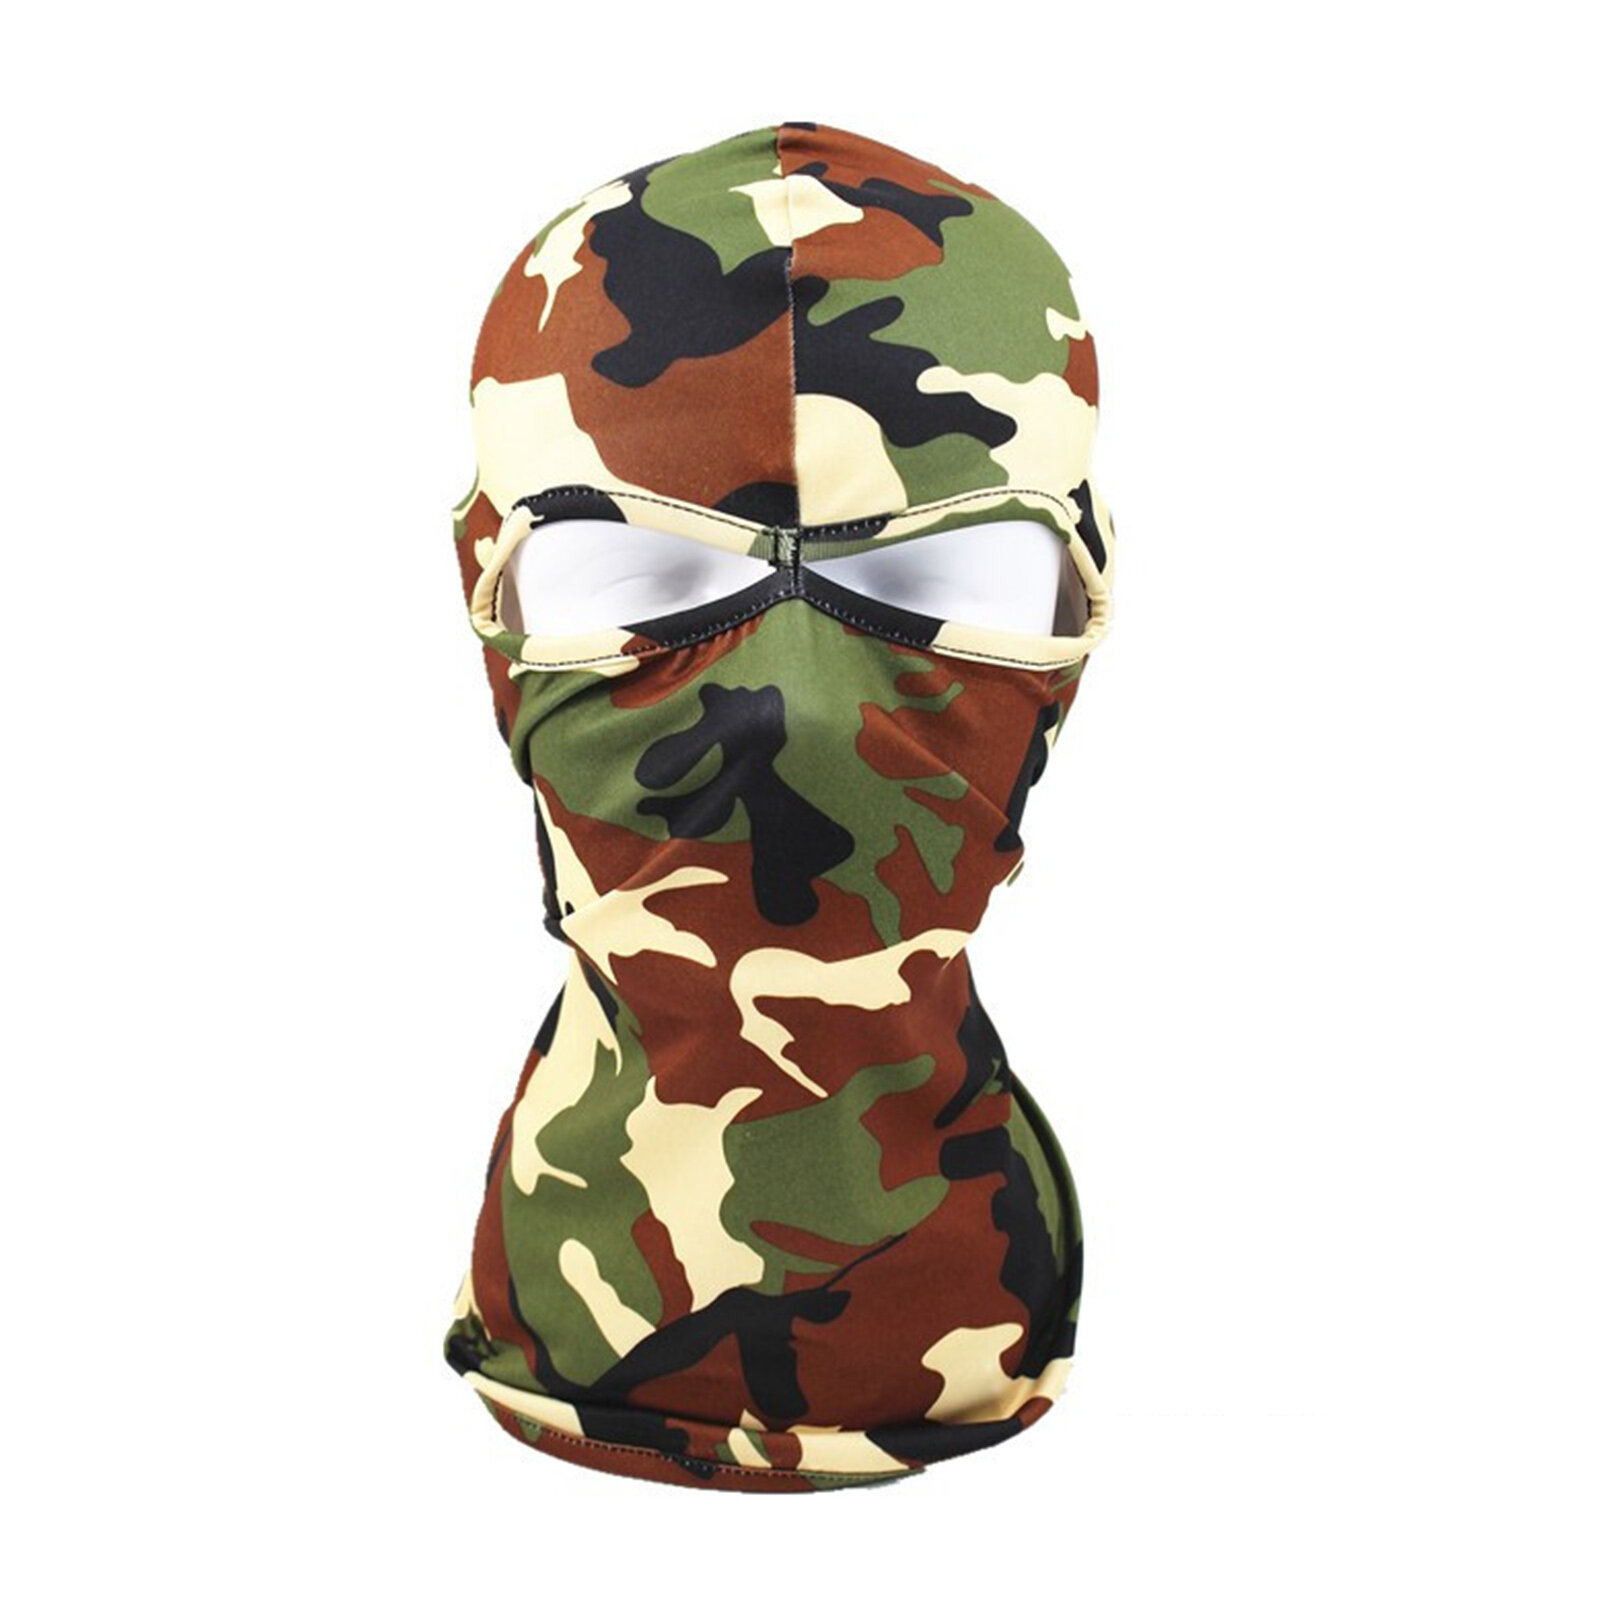 Unisex Polyester Camouflage Casual Outdoor Riding Windproof Sunshade Neck Shield Face Mask Beanie Ha